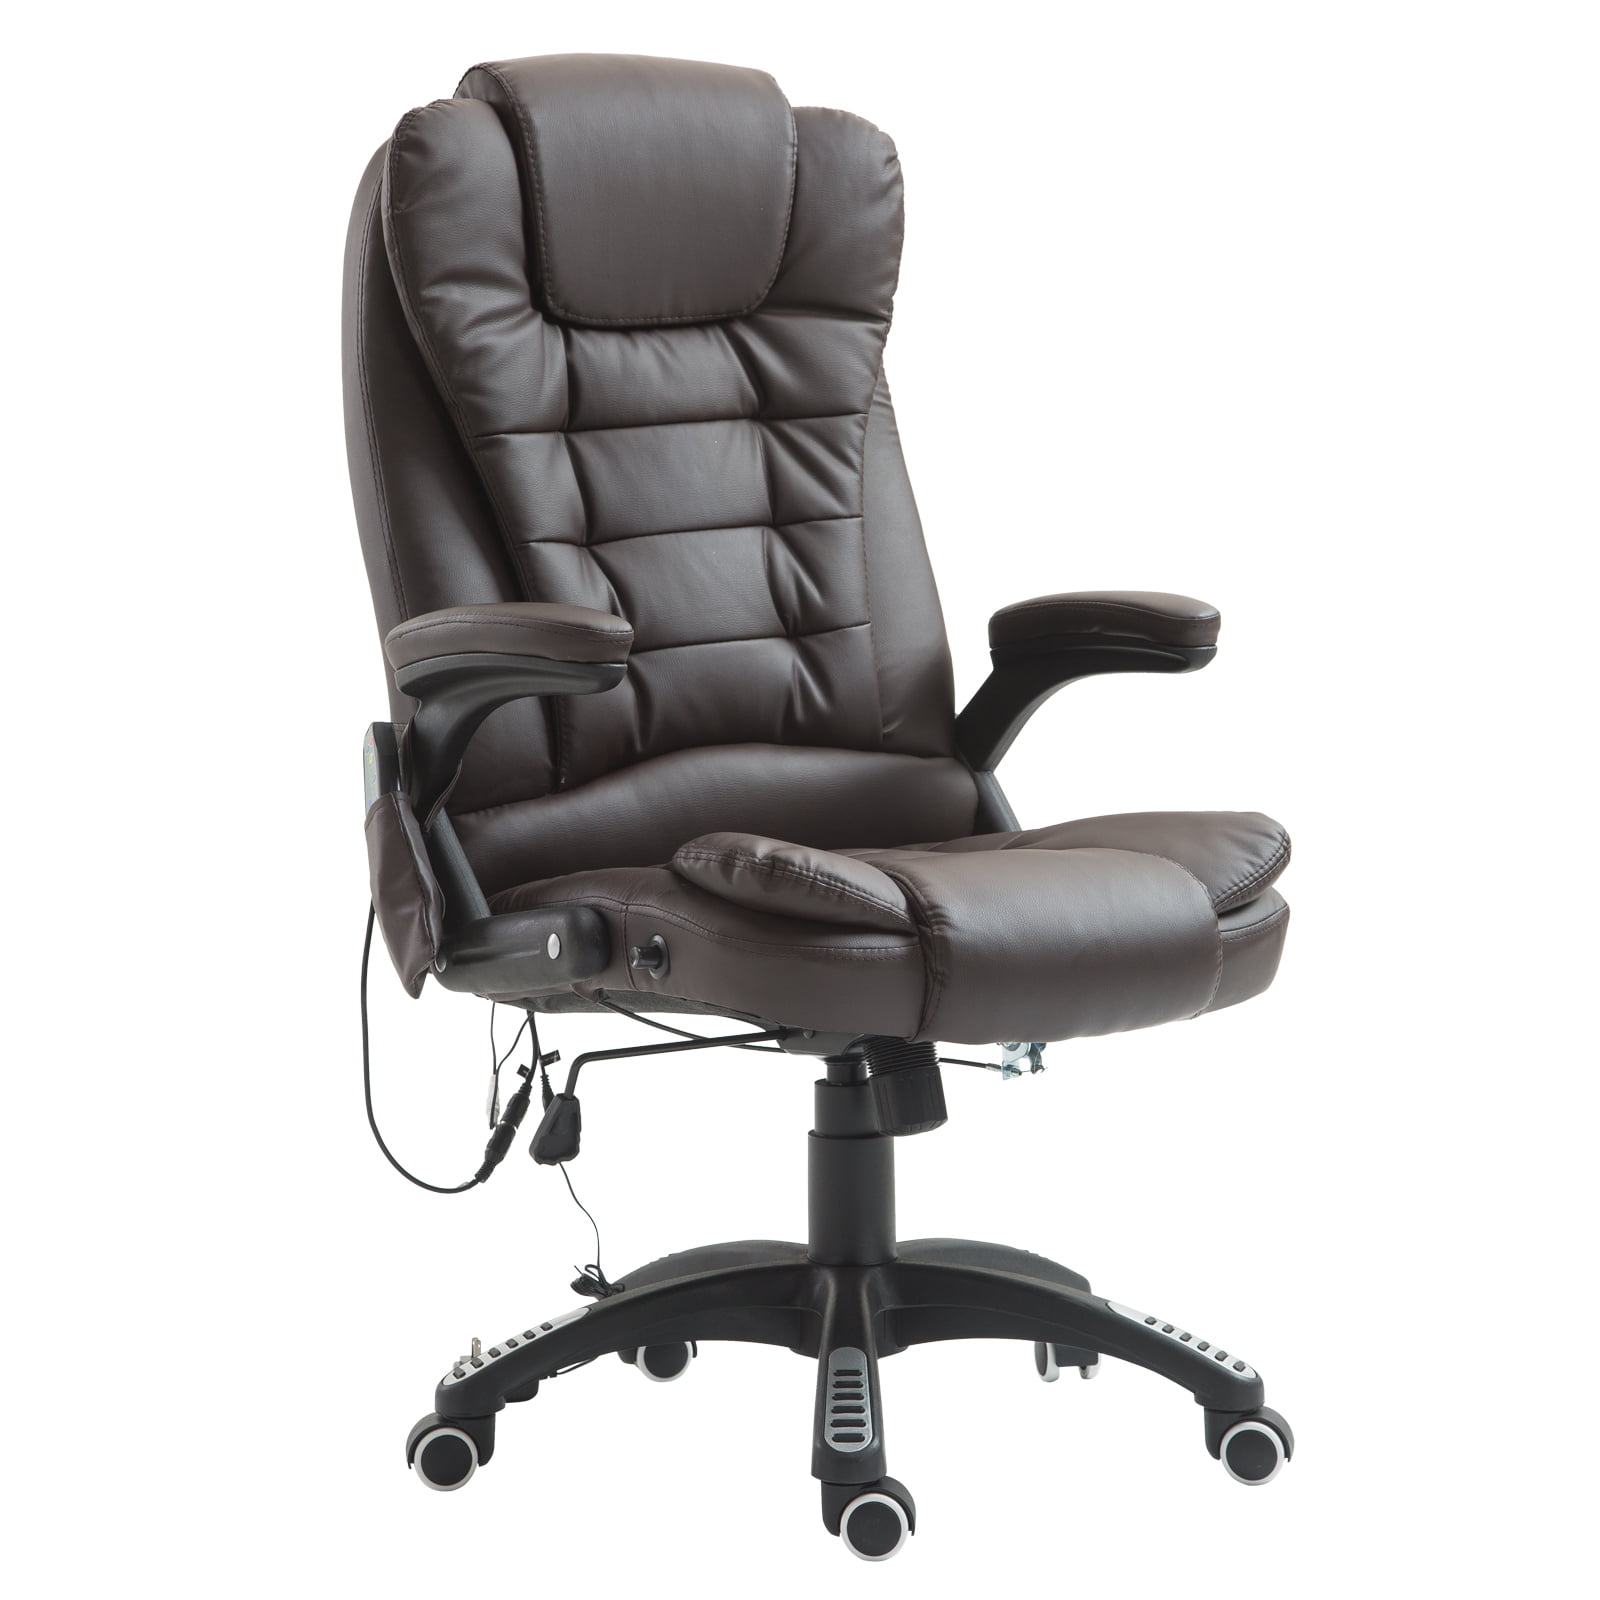 Executive Office Chair Micro PU Leather Padded Swivel Computer Desk Seat Chair 